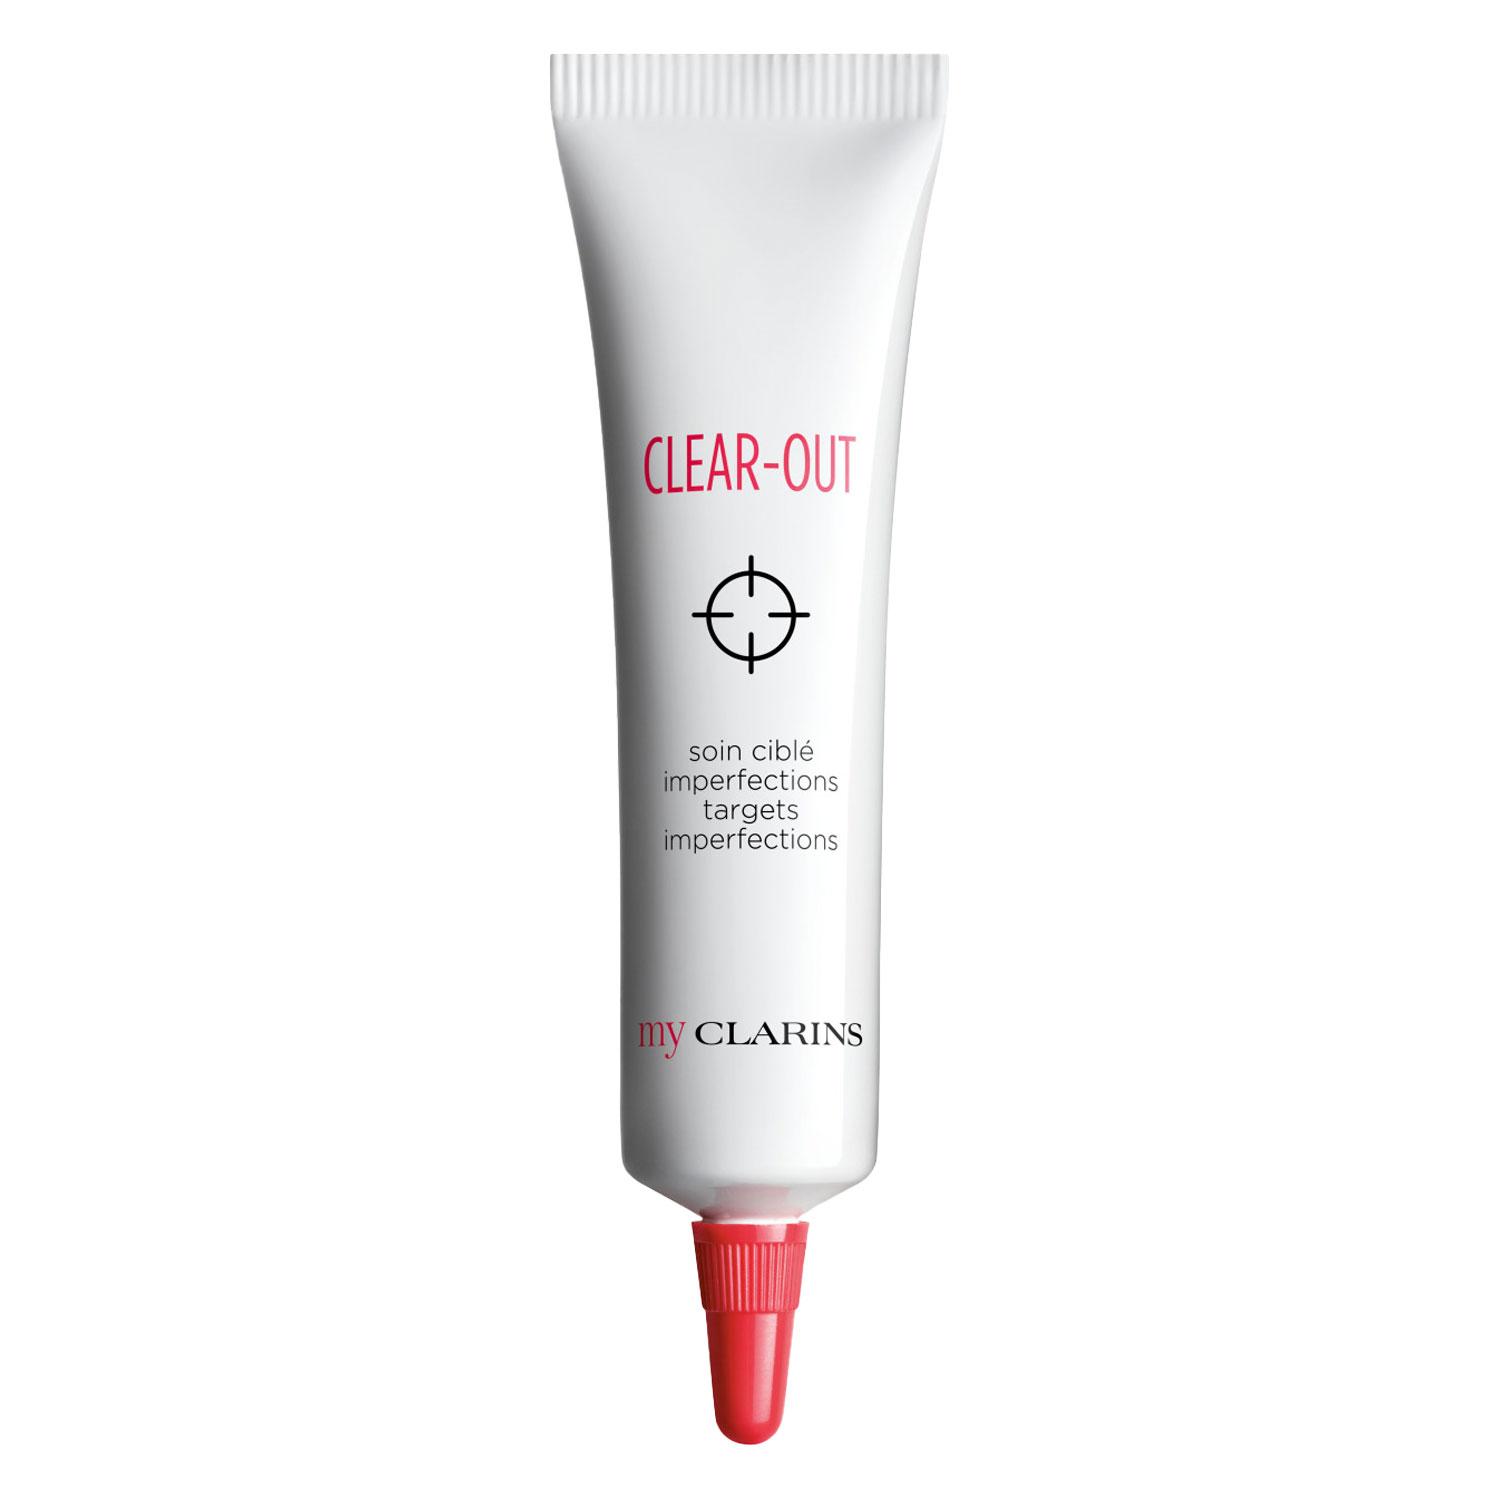 myCLARINS - CLEAR-OUT Soin Ciblé Imperfections